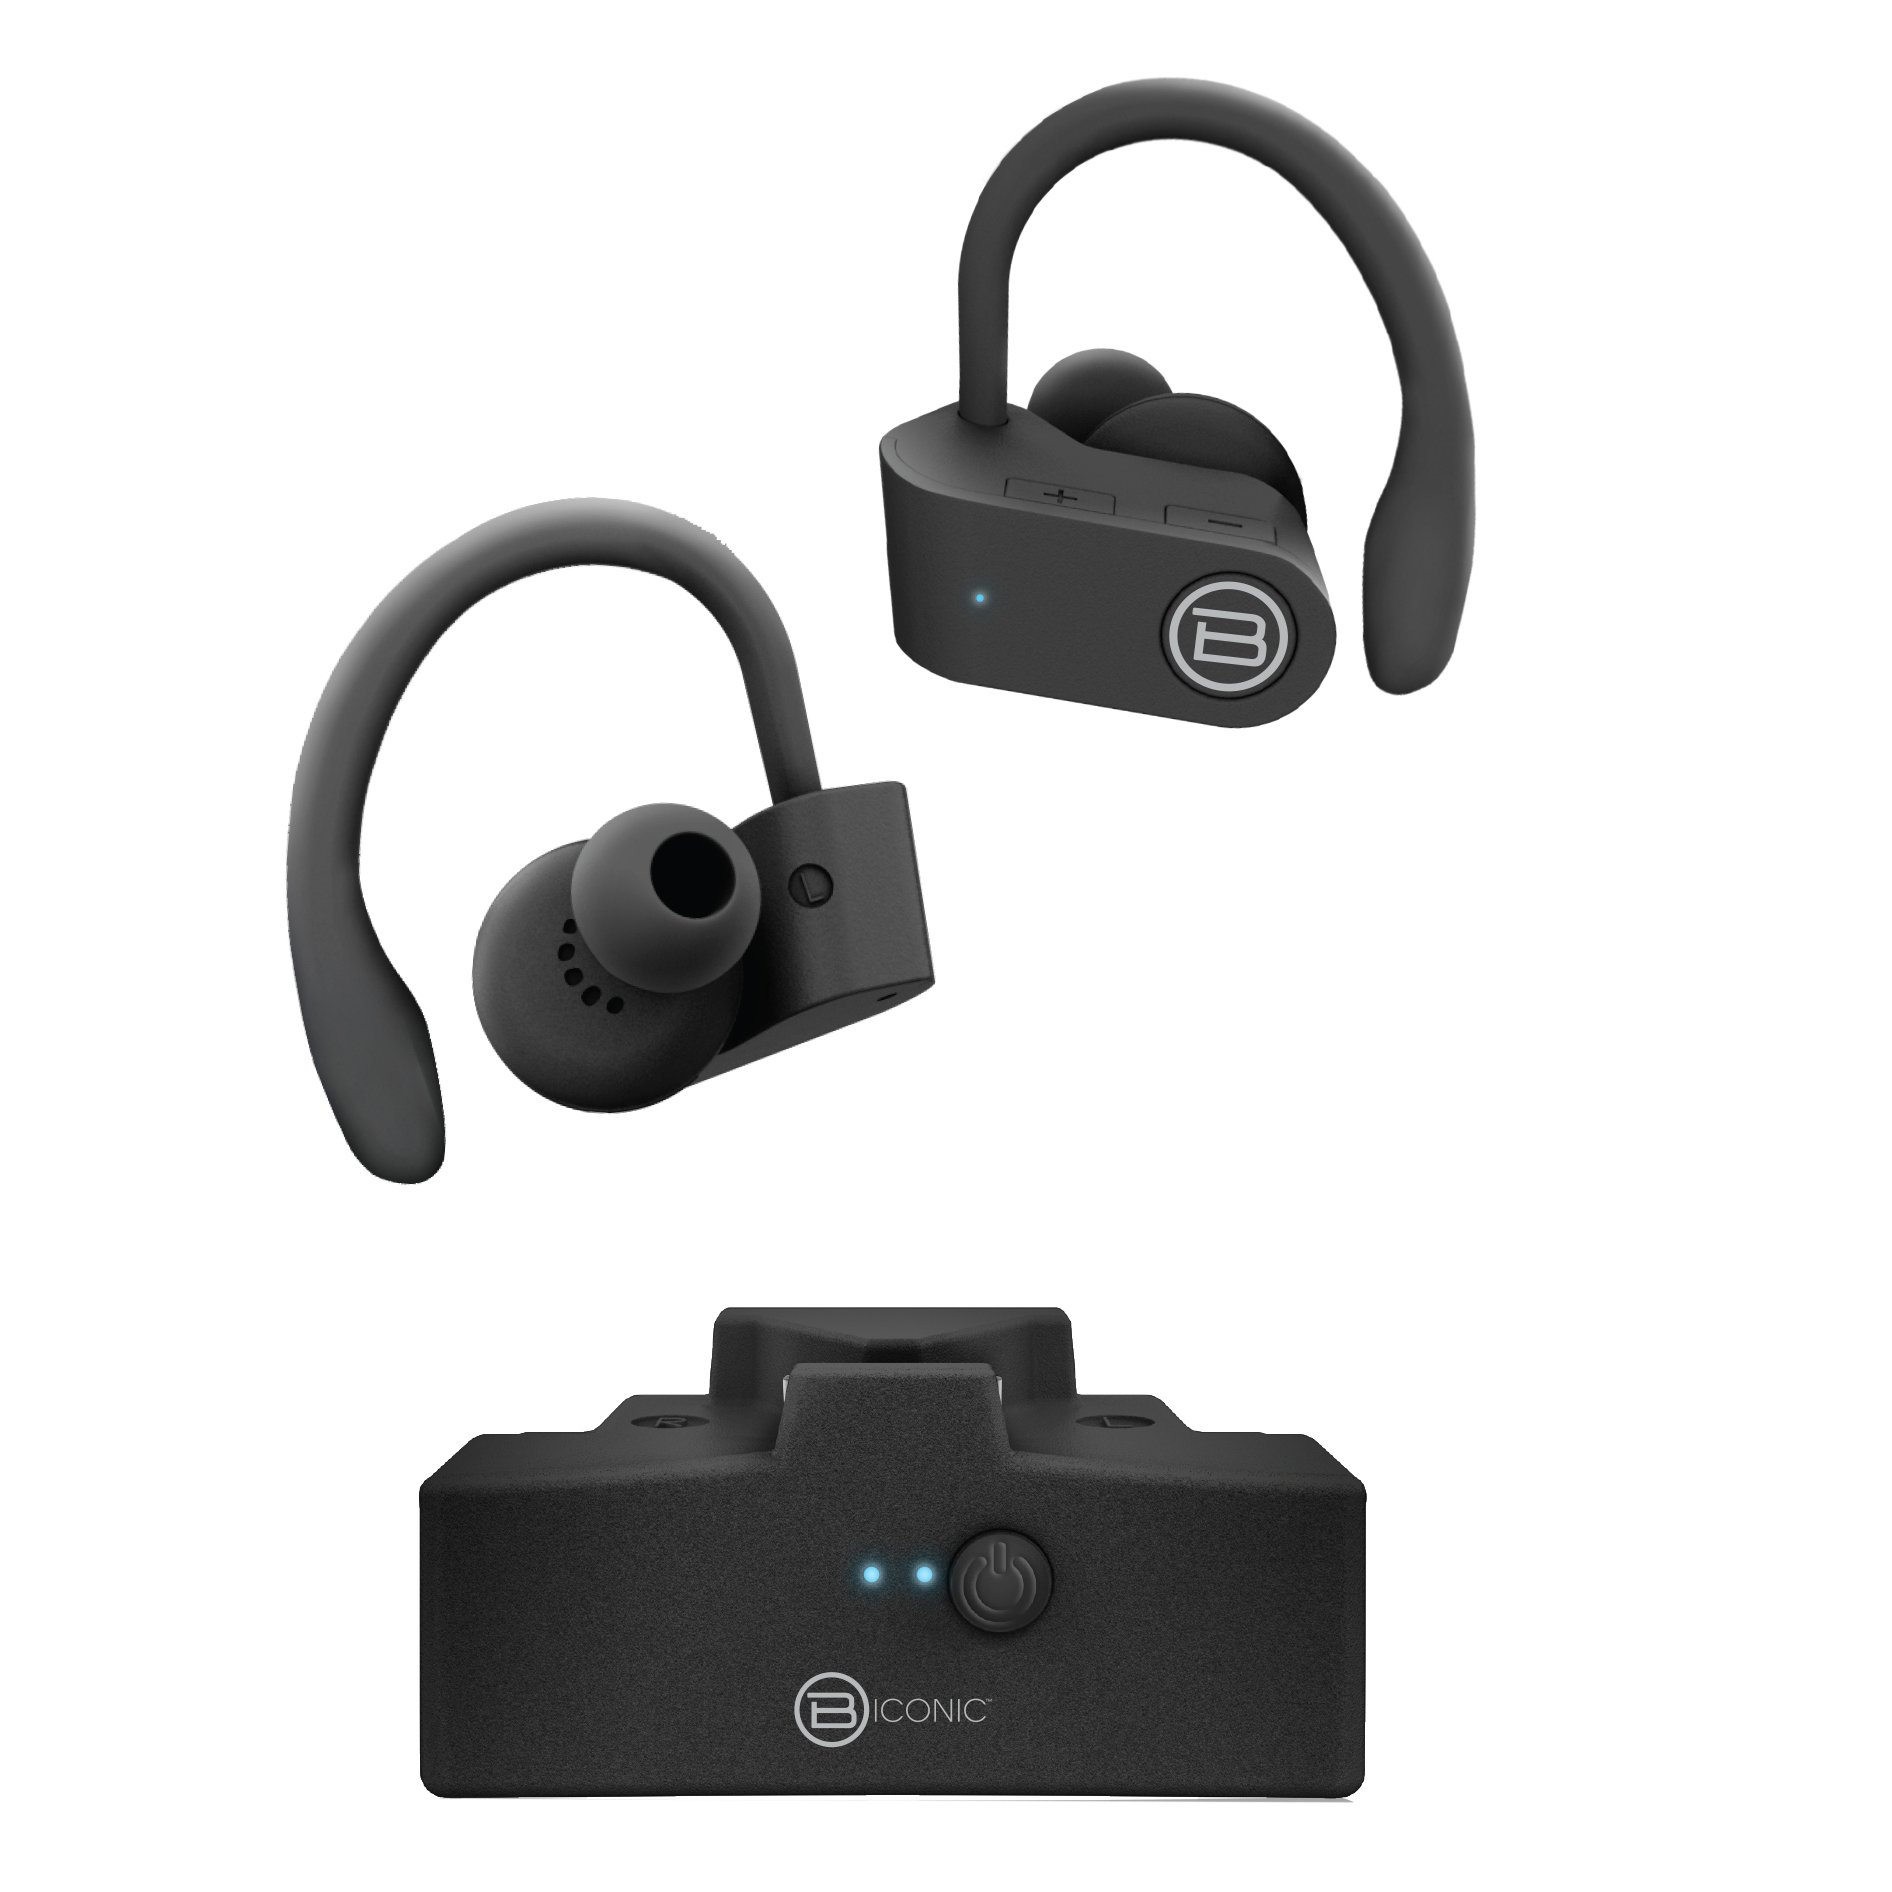 Connecting Biconic Wireless Earbuds: A How-To Guide